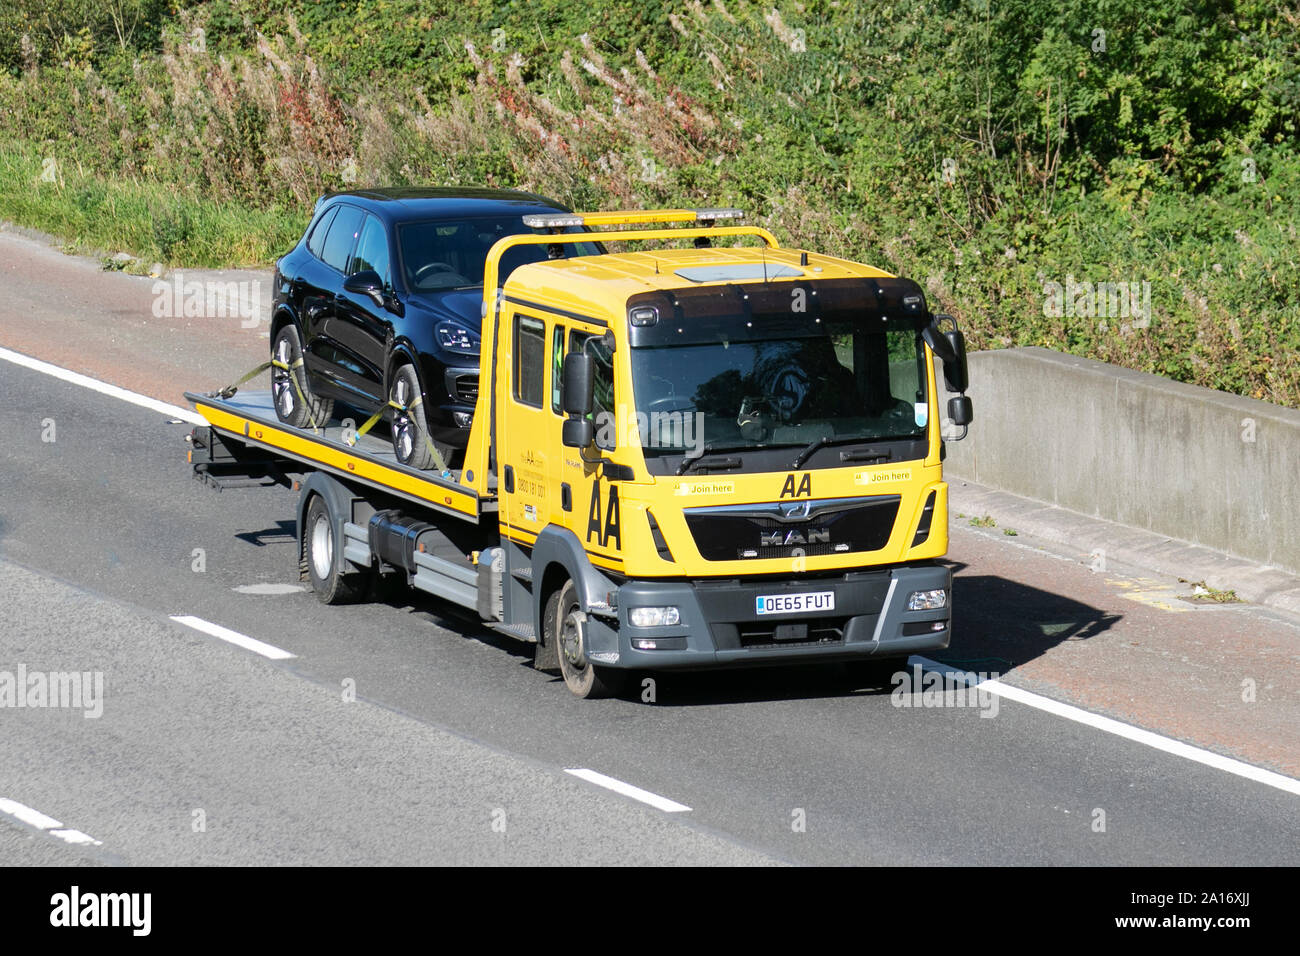 AA Flatbed truck emergency breakdown rescue vehicle; UK Vehicular traffic, transport, modern, saloon cars, south-bound on the 3 lane M6 motorway highway. Stock Photo